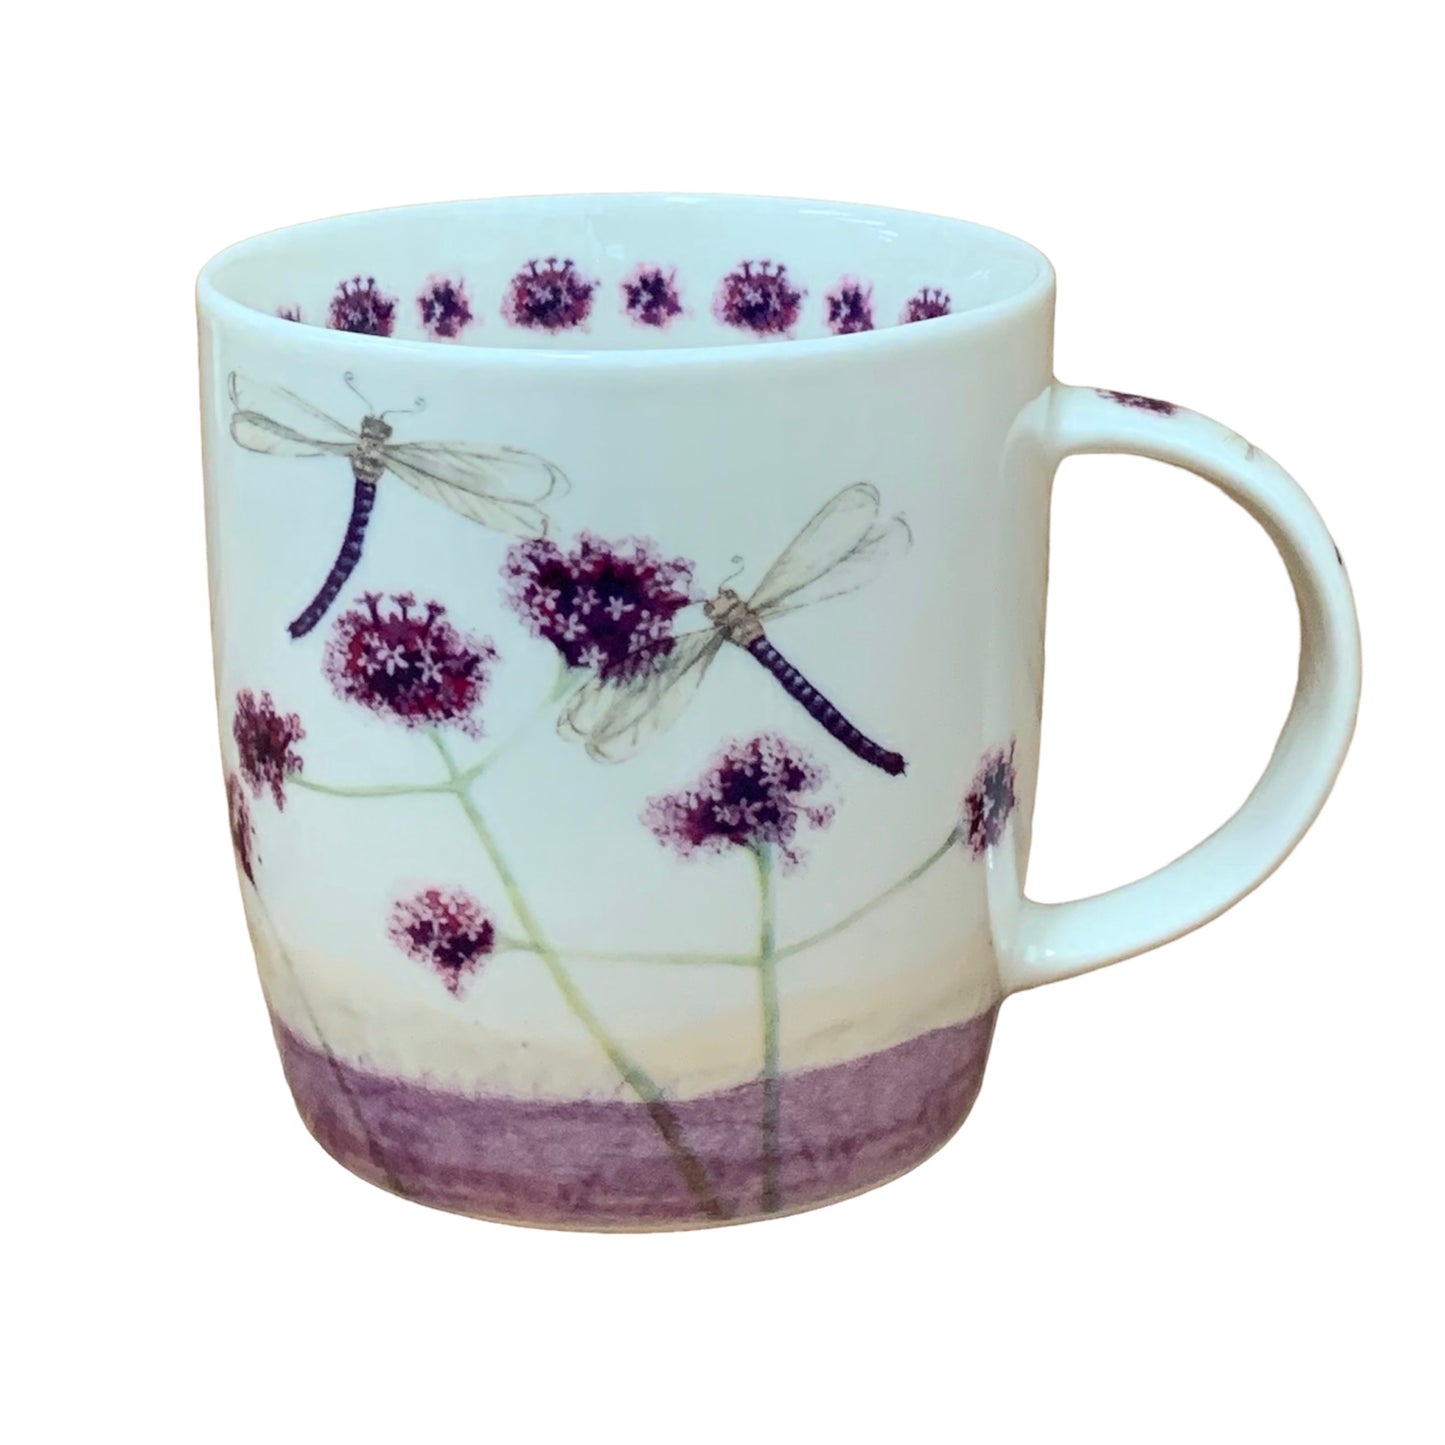 This Alex Clark mug is illustrated with lovely dragonflies hoovering over meadow flowers.  This mug also features a flower illustration around the inside rim & illustrations down the handle.  